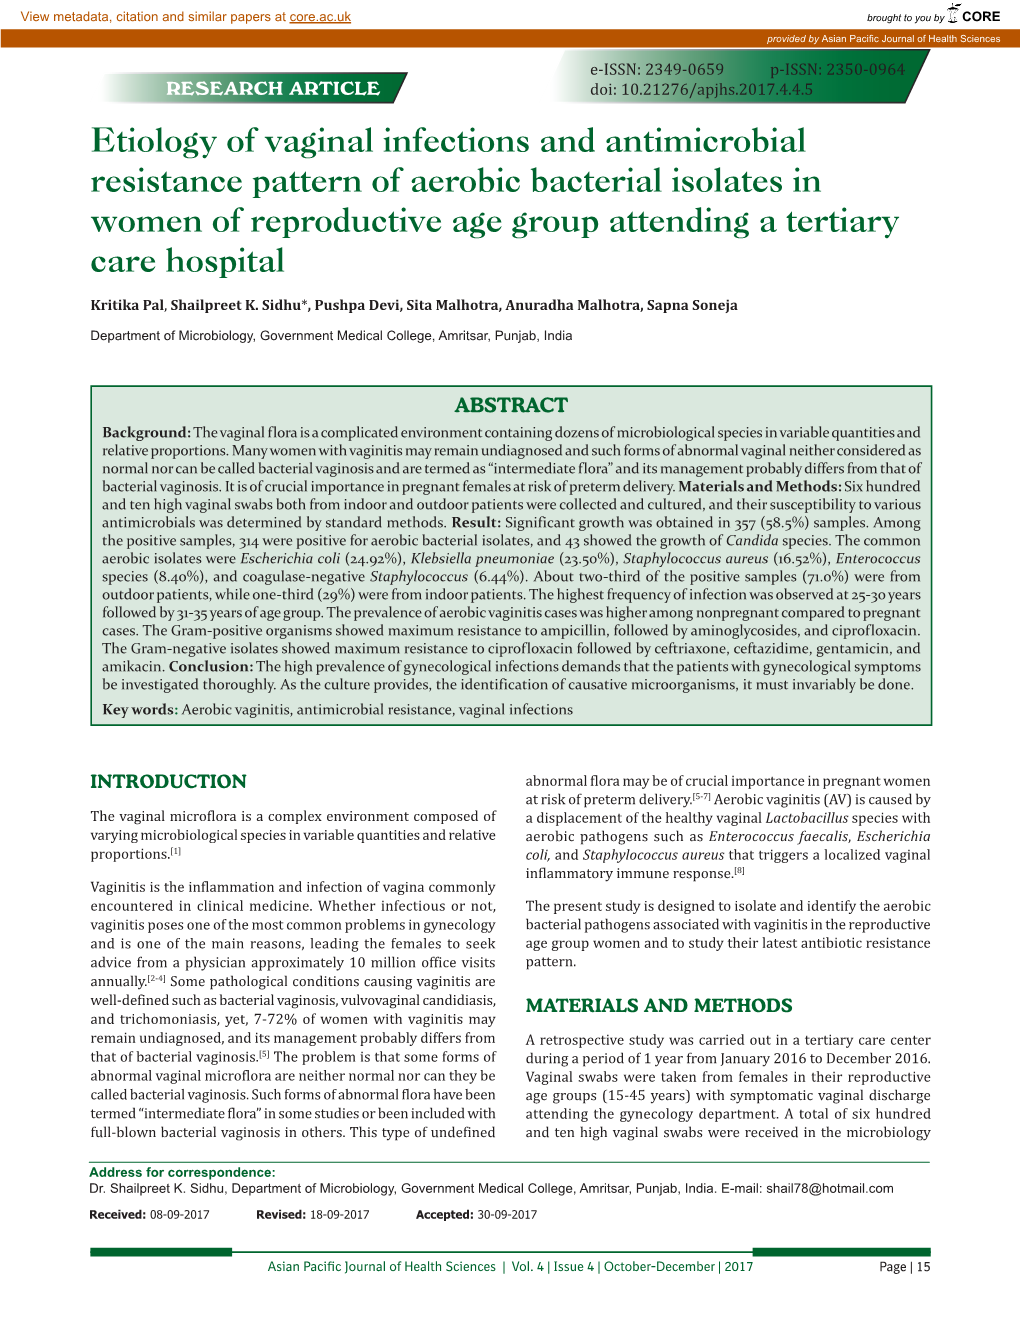 Etiology of Vaginal Infections and Antimicrobial Resistance Pattern Of